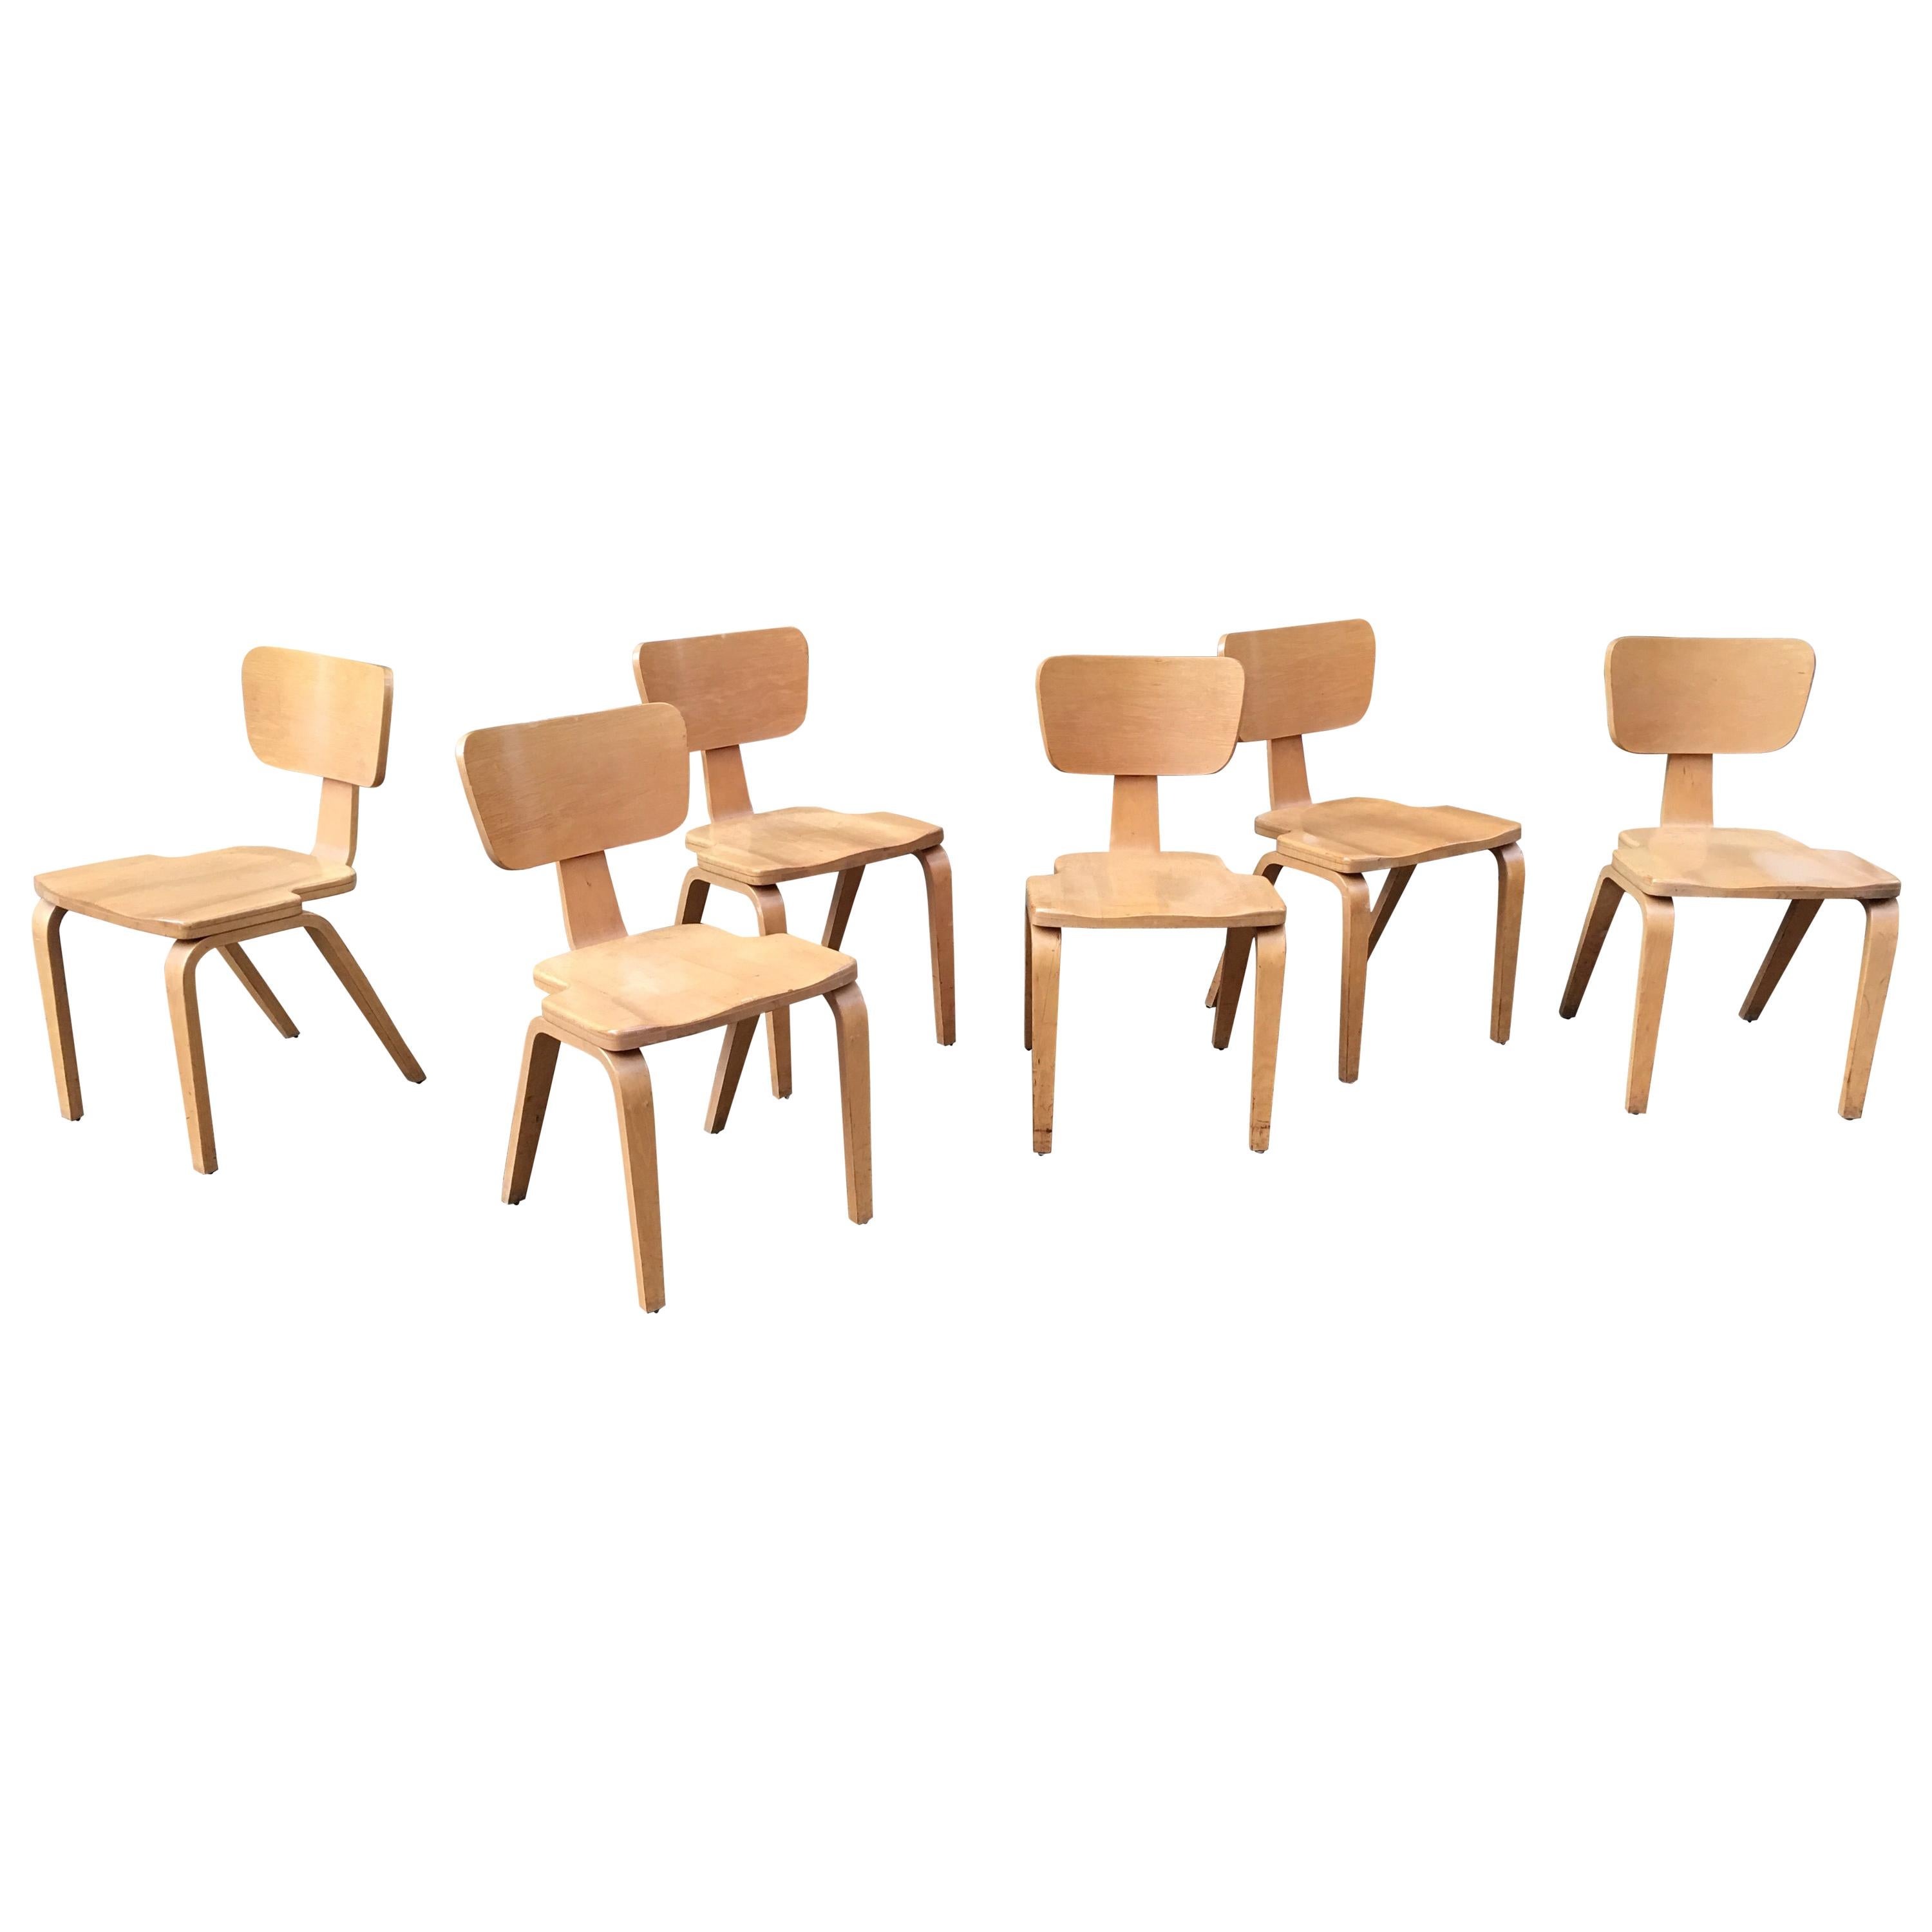 Joe Atkinson for Thonet Set of 6 Stacking Chairs